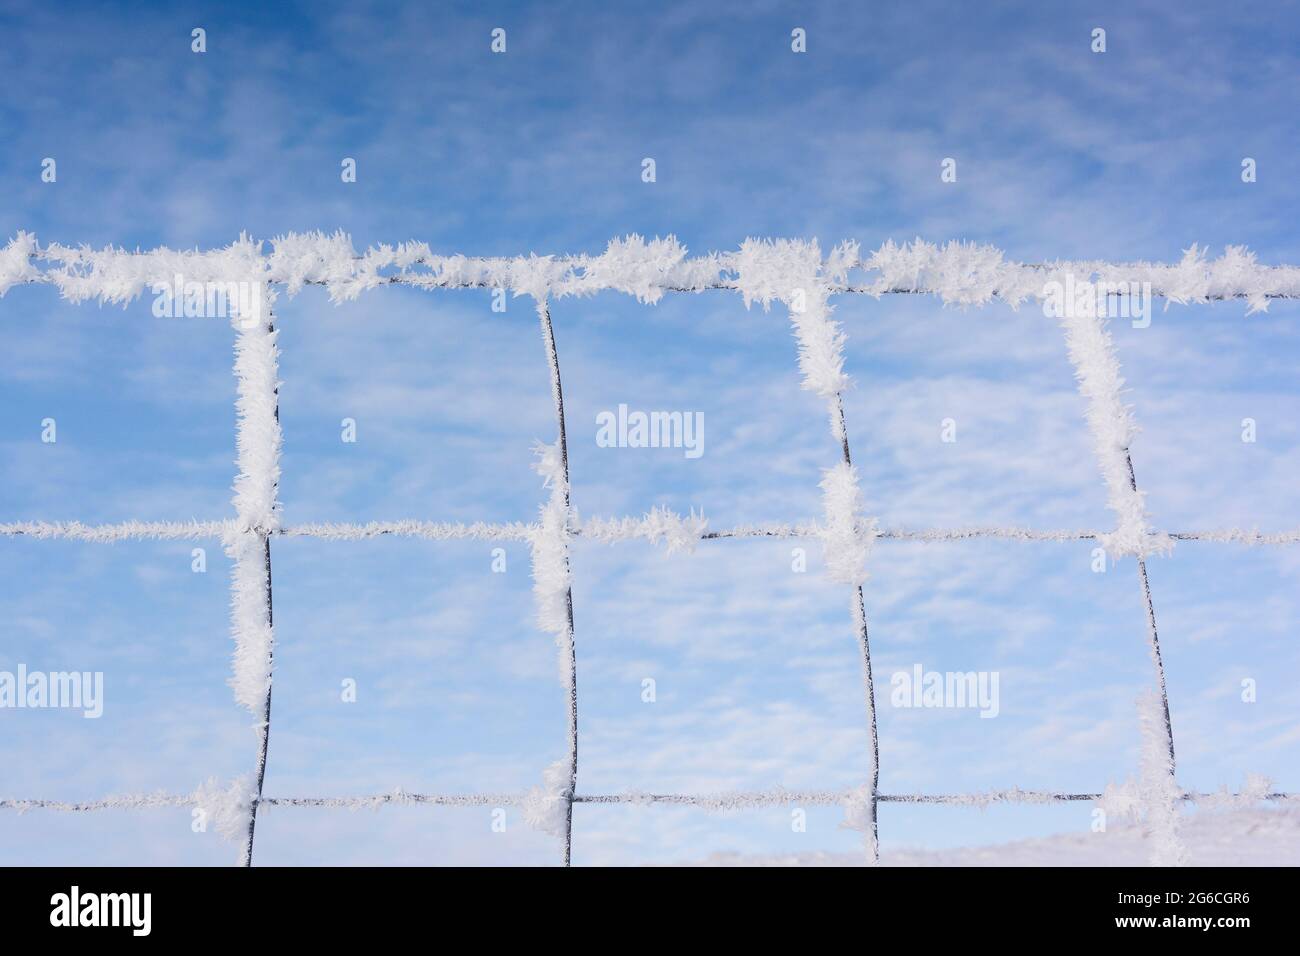 Hoar frost forming on wire fence during a cold winter spell in the Yorkshire Dales, UK. Stock Photo